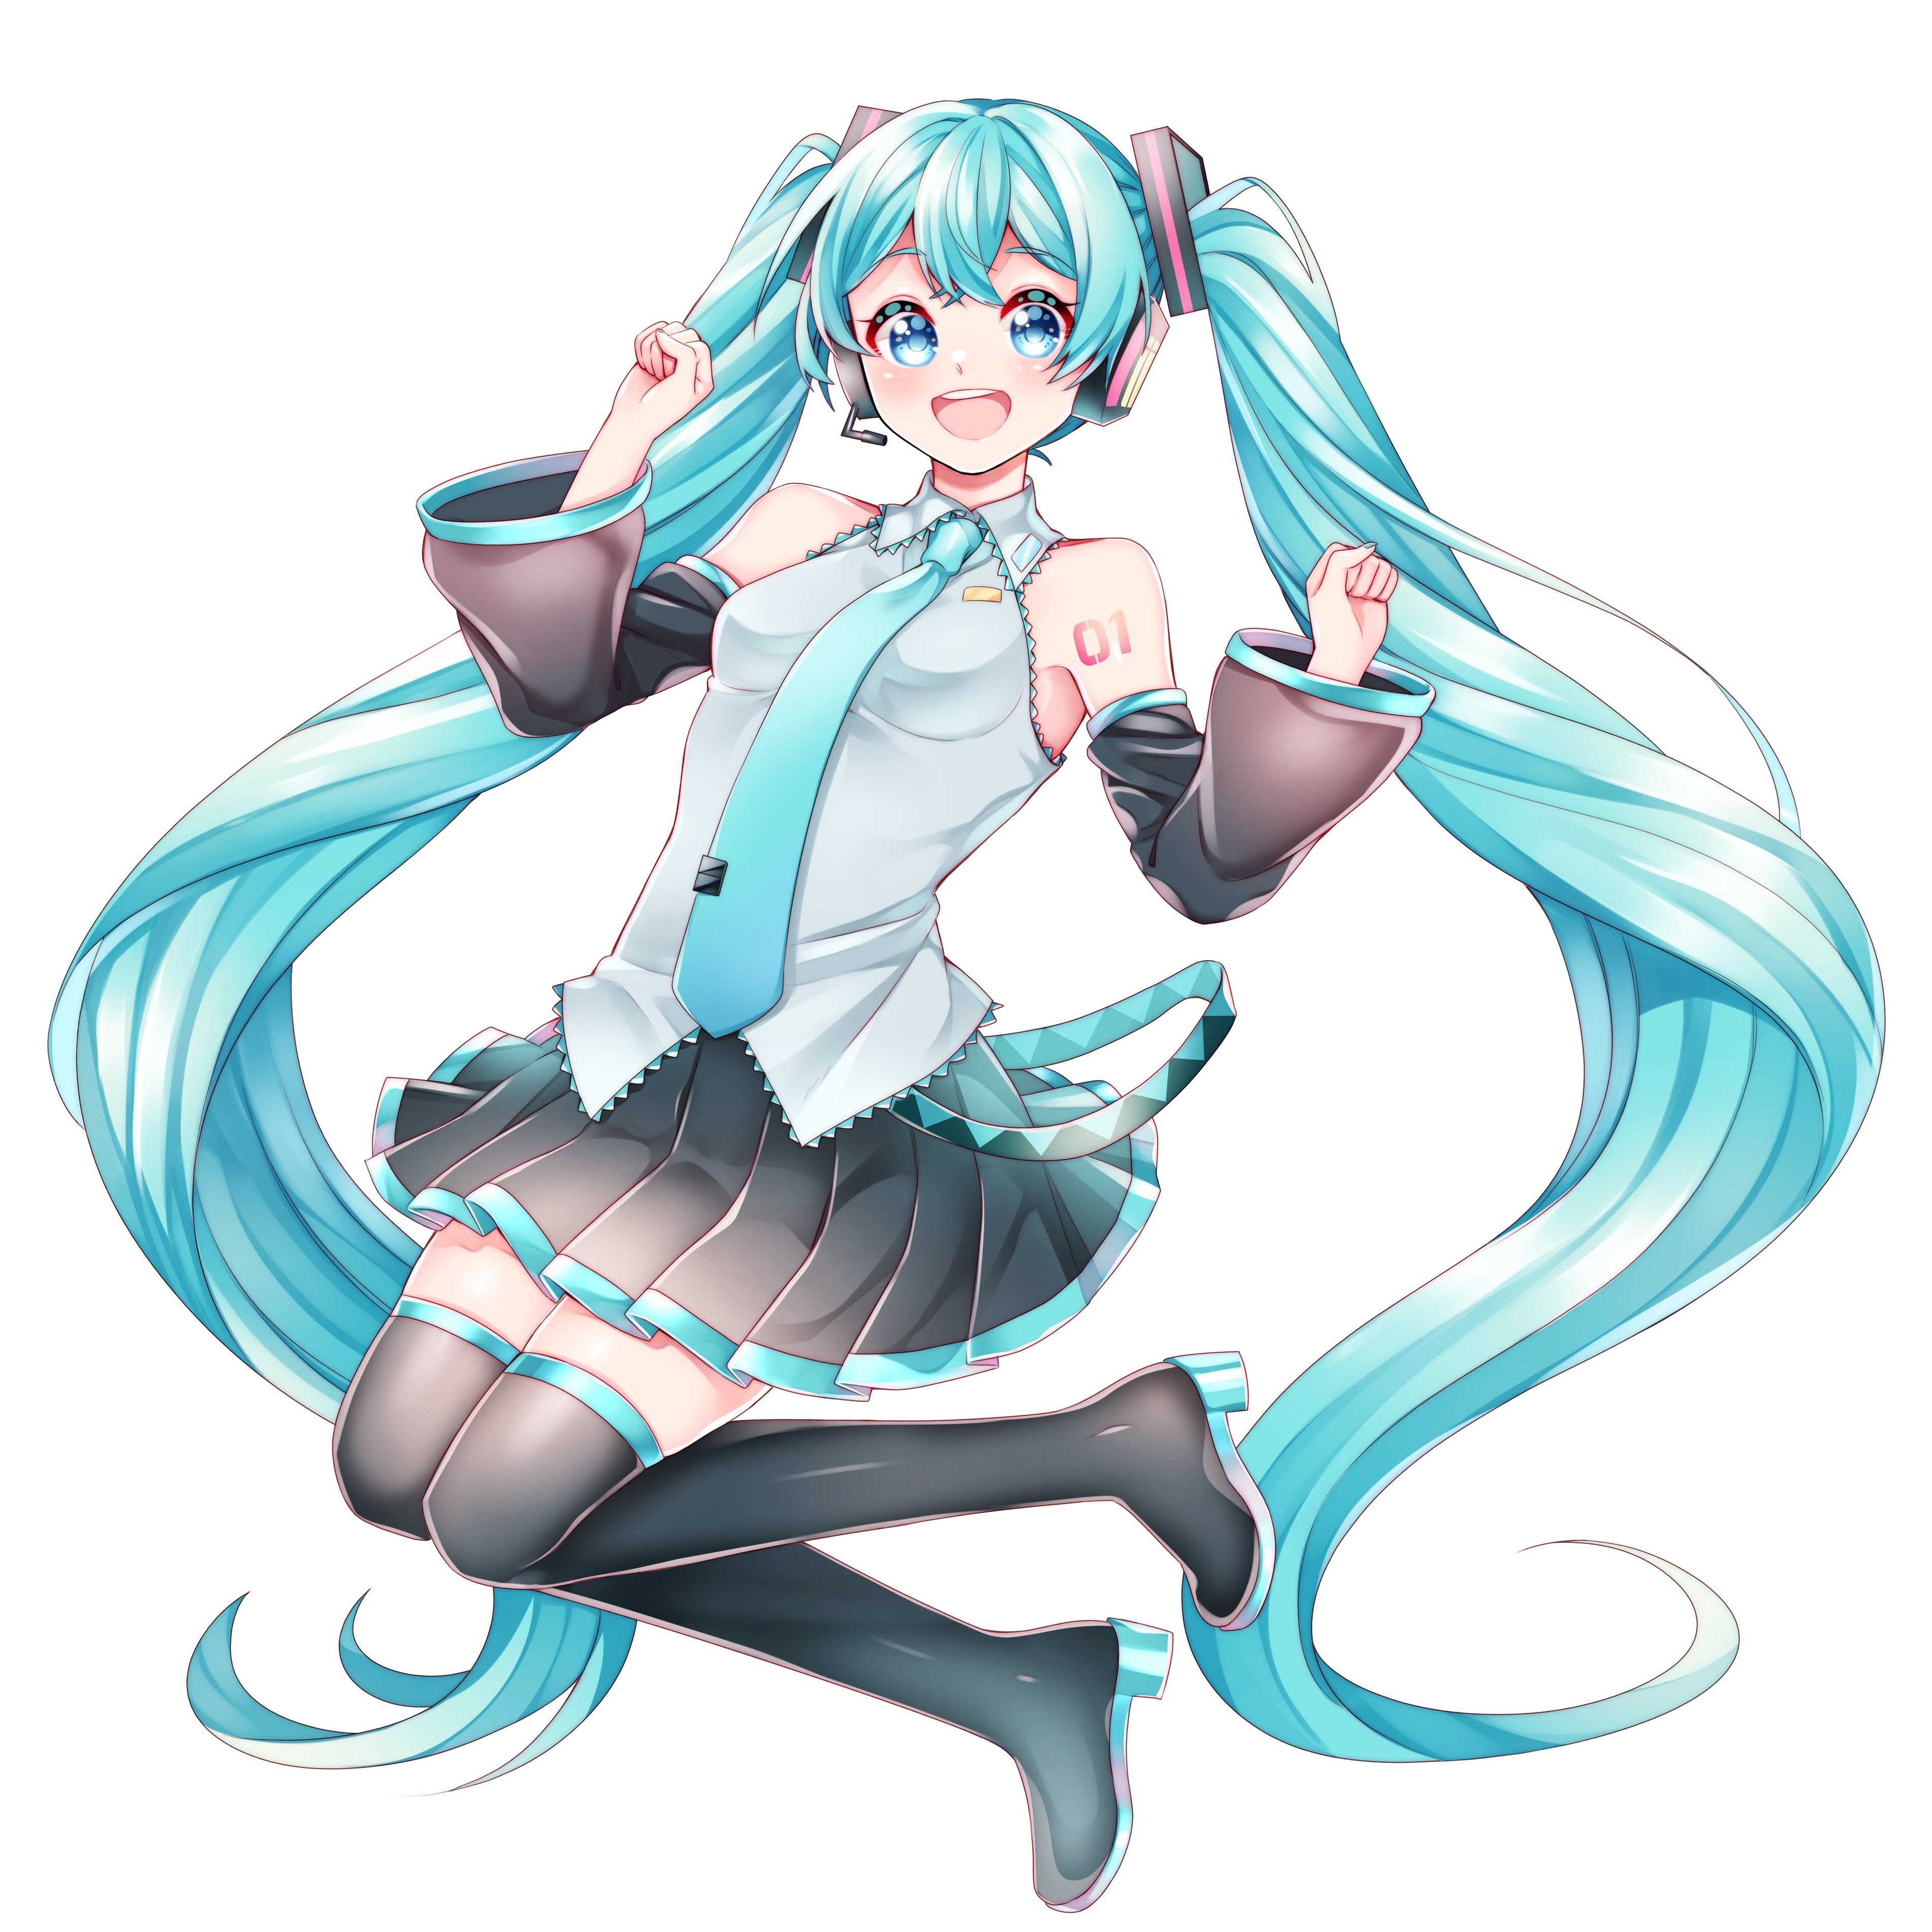 Twitter 上的 マスもふﾌﾟﾝ 可愛い初音ミク描きました T Co Sibt4zmzjt Twitter